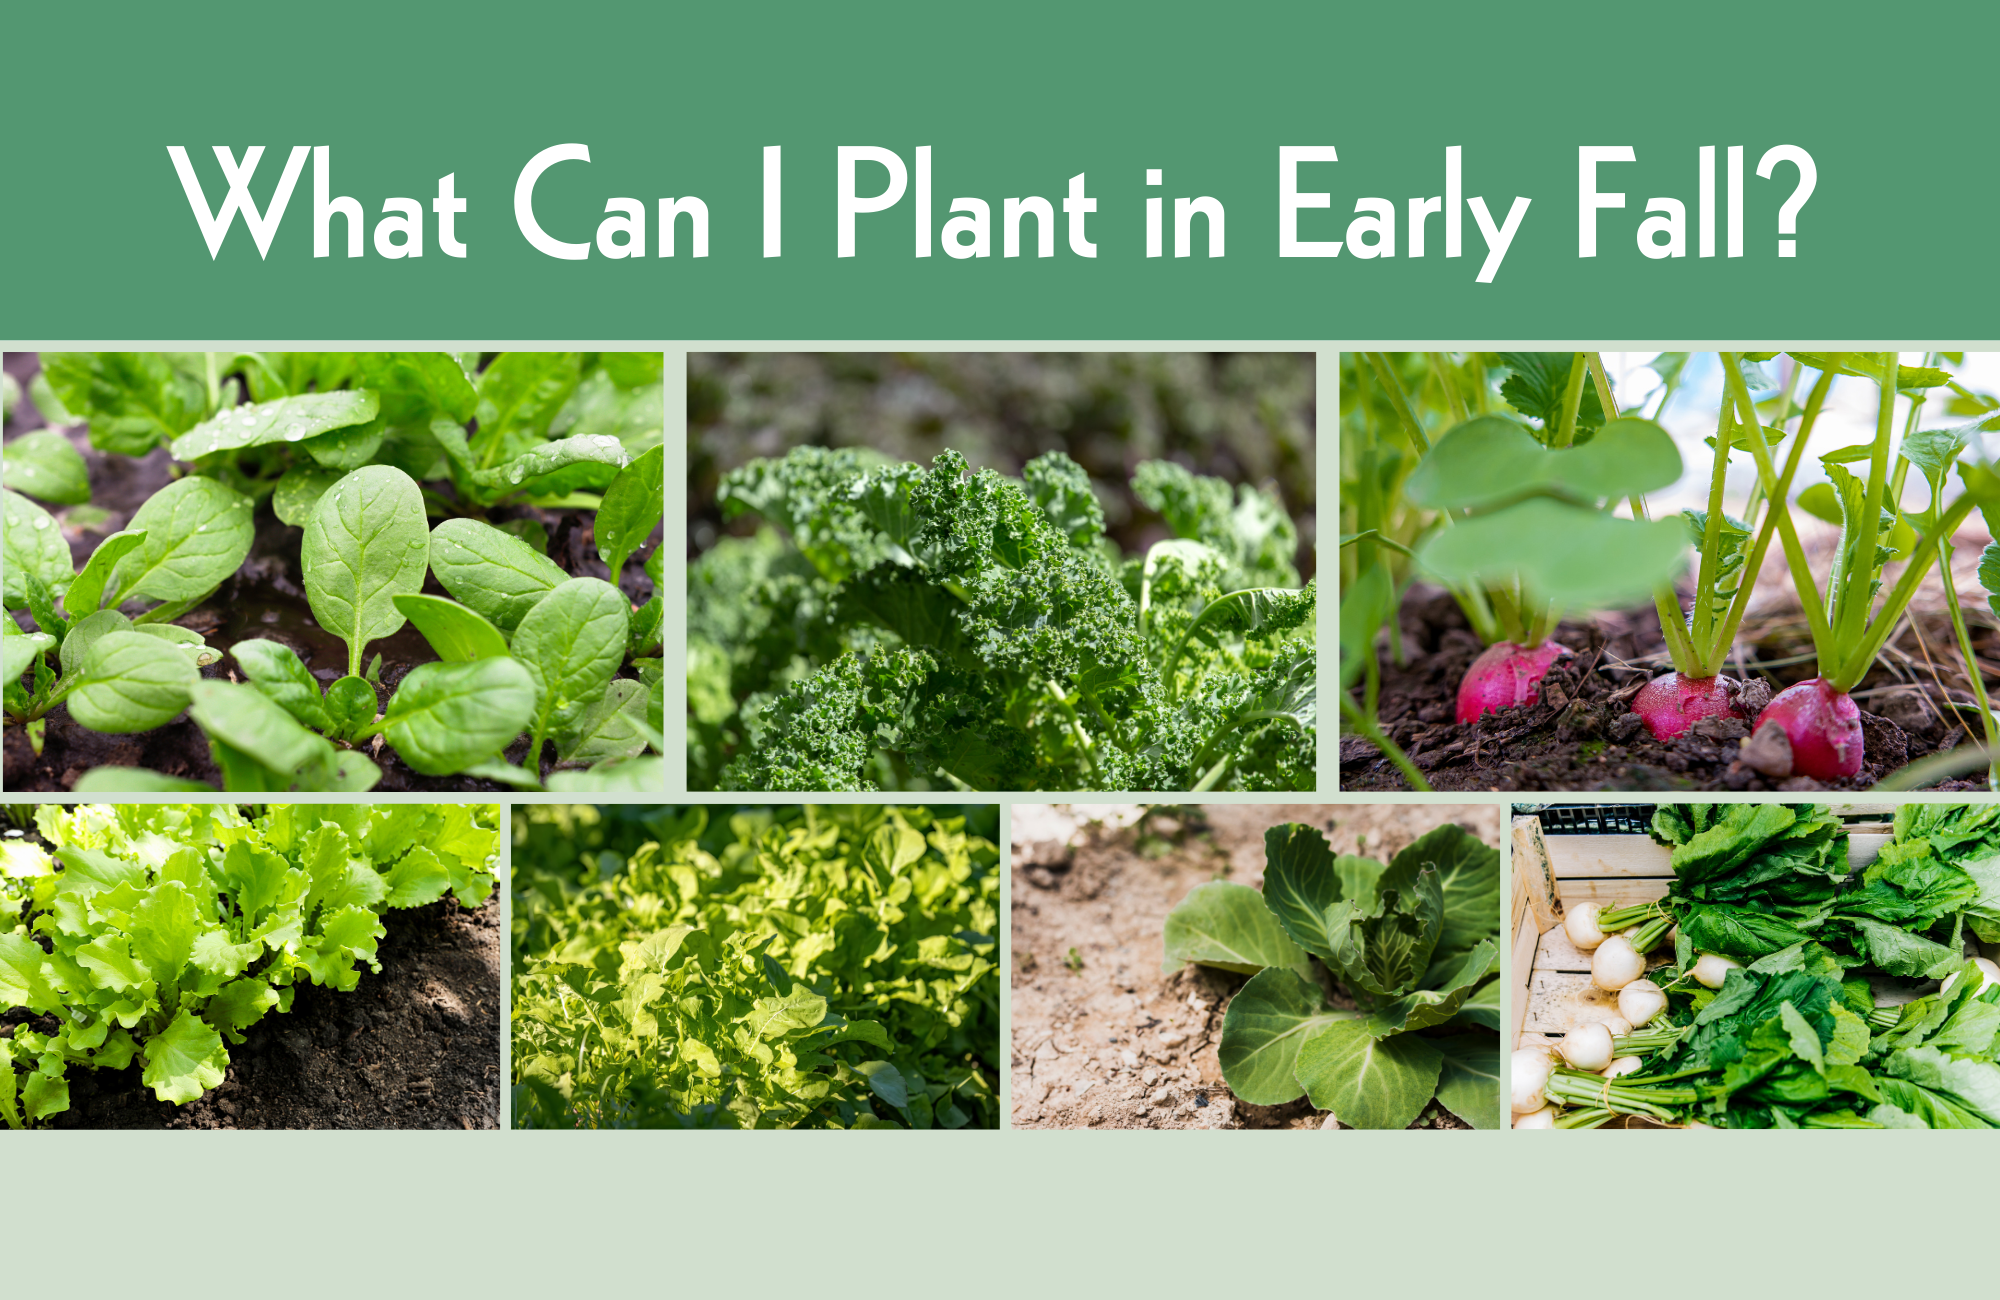 A collage of plant images with the text 'what can I plant in early fall?'